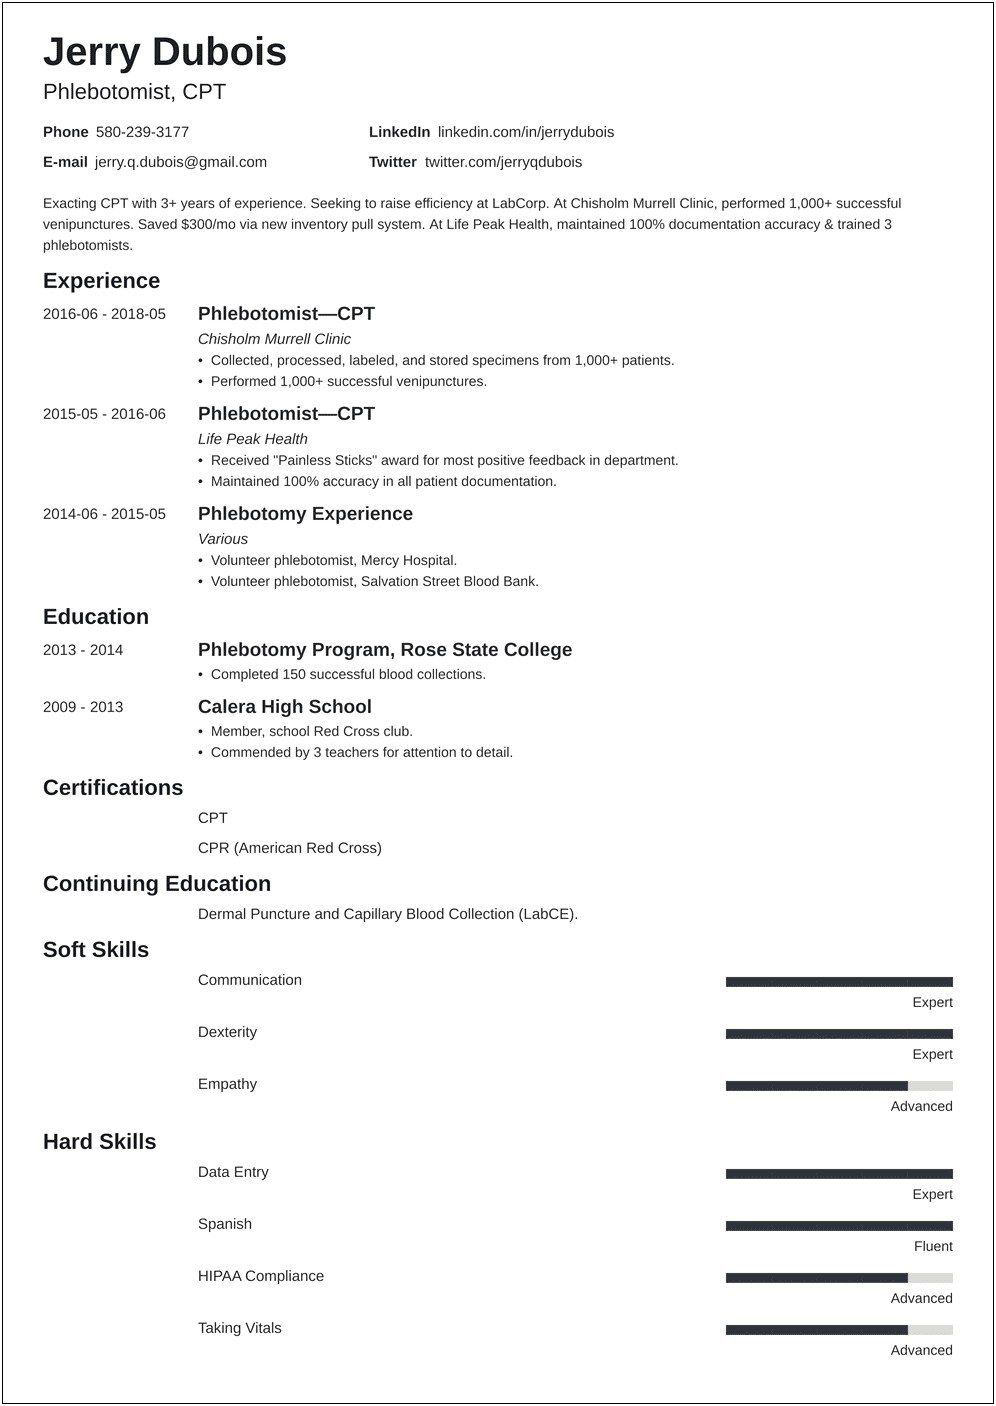 Resume Objective For Phlebotomy Technician